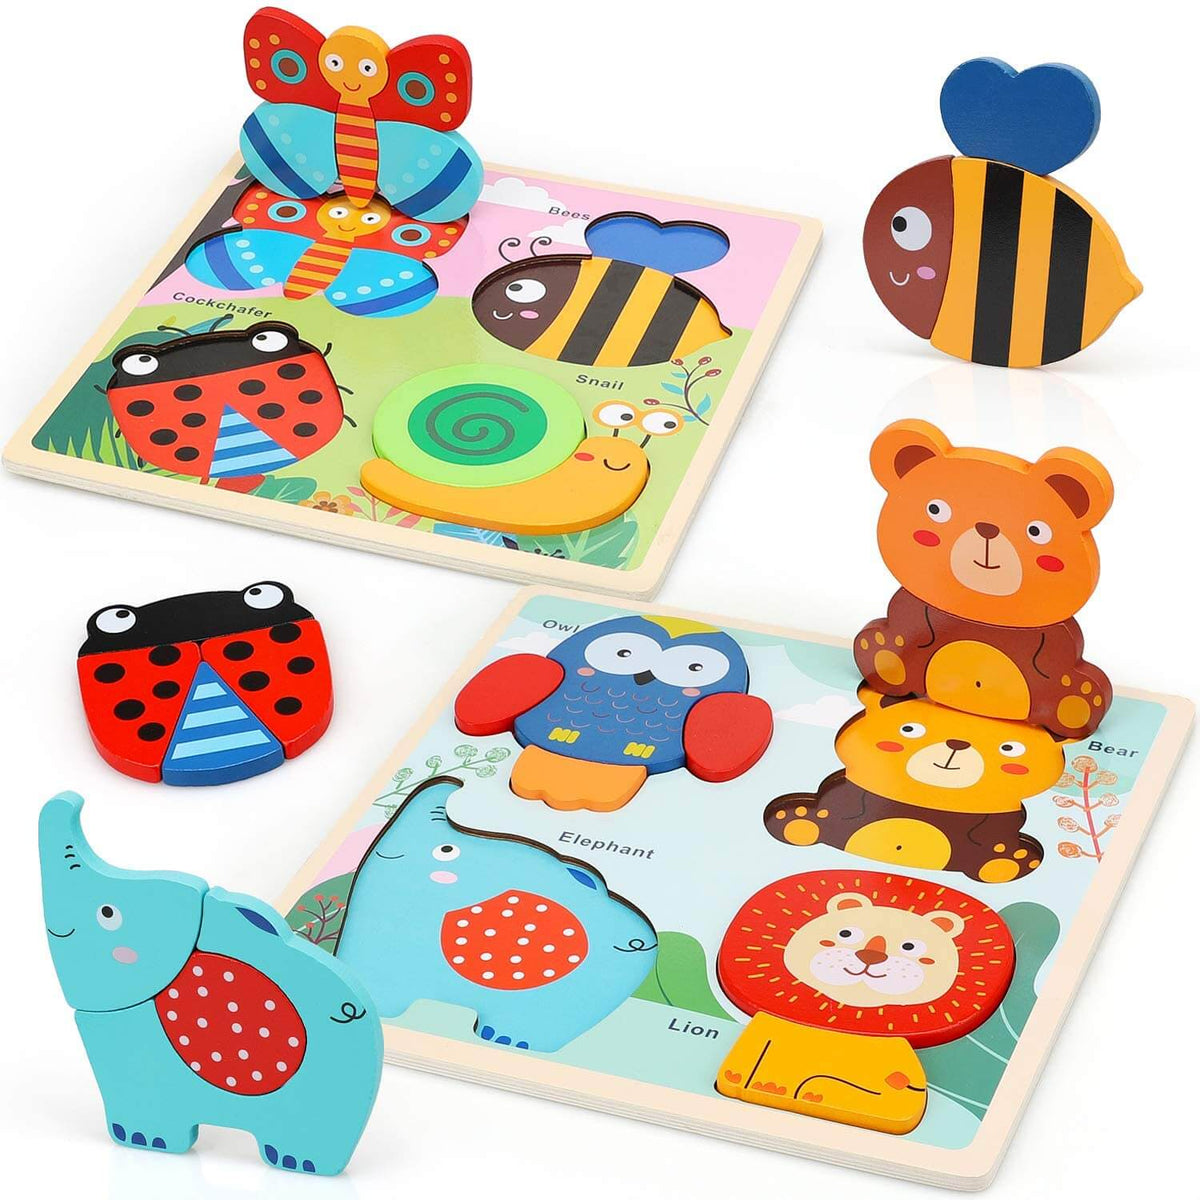  CCLIFE Wooden Jigsaw Puzzles Set for Kids 2-5 Years 12 Piece  Colorful Wooden Educational Animal Puzzles (4 Puzzles) : Toys & Games